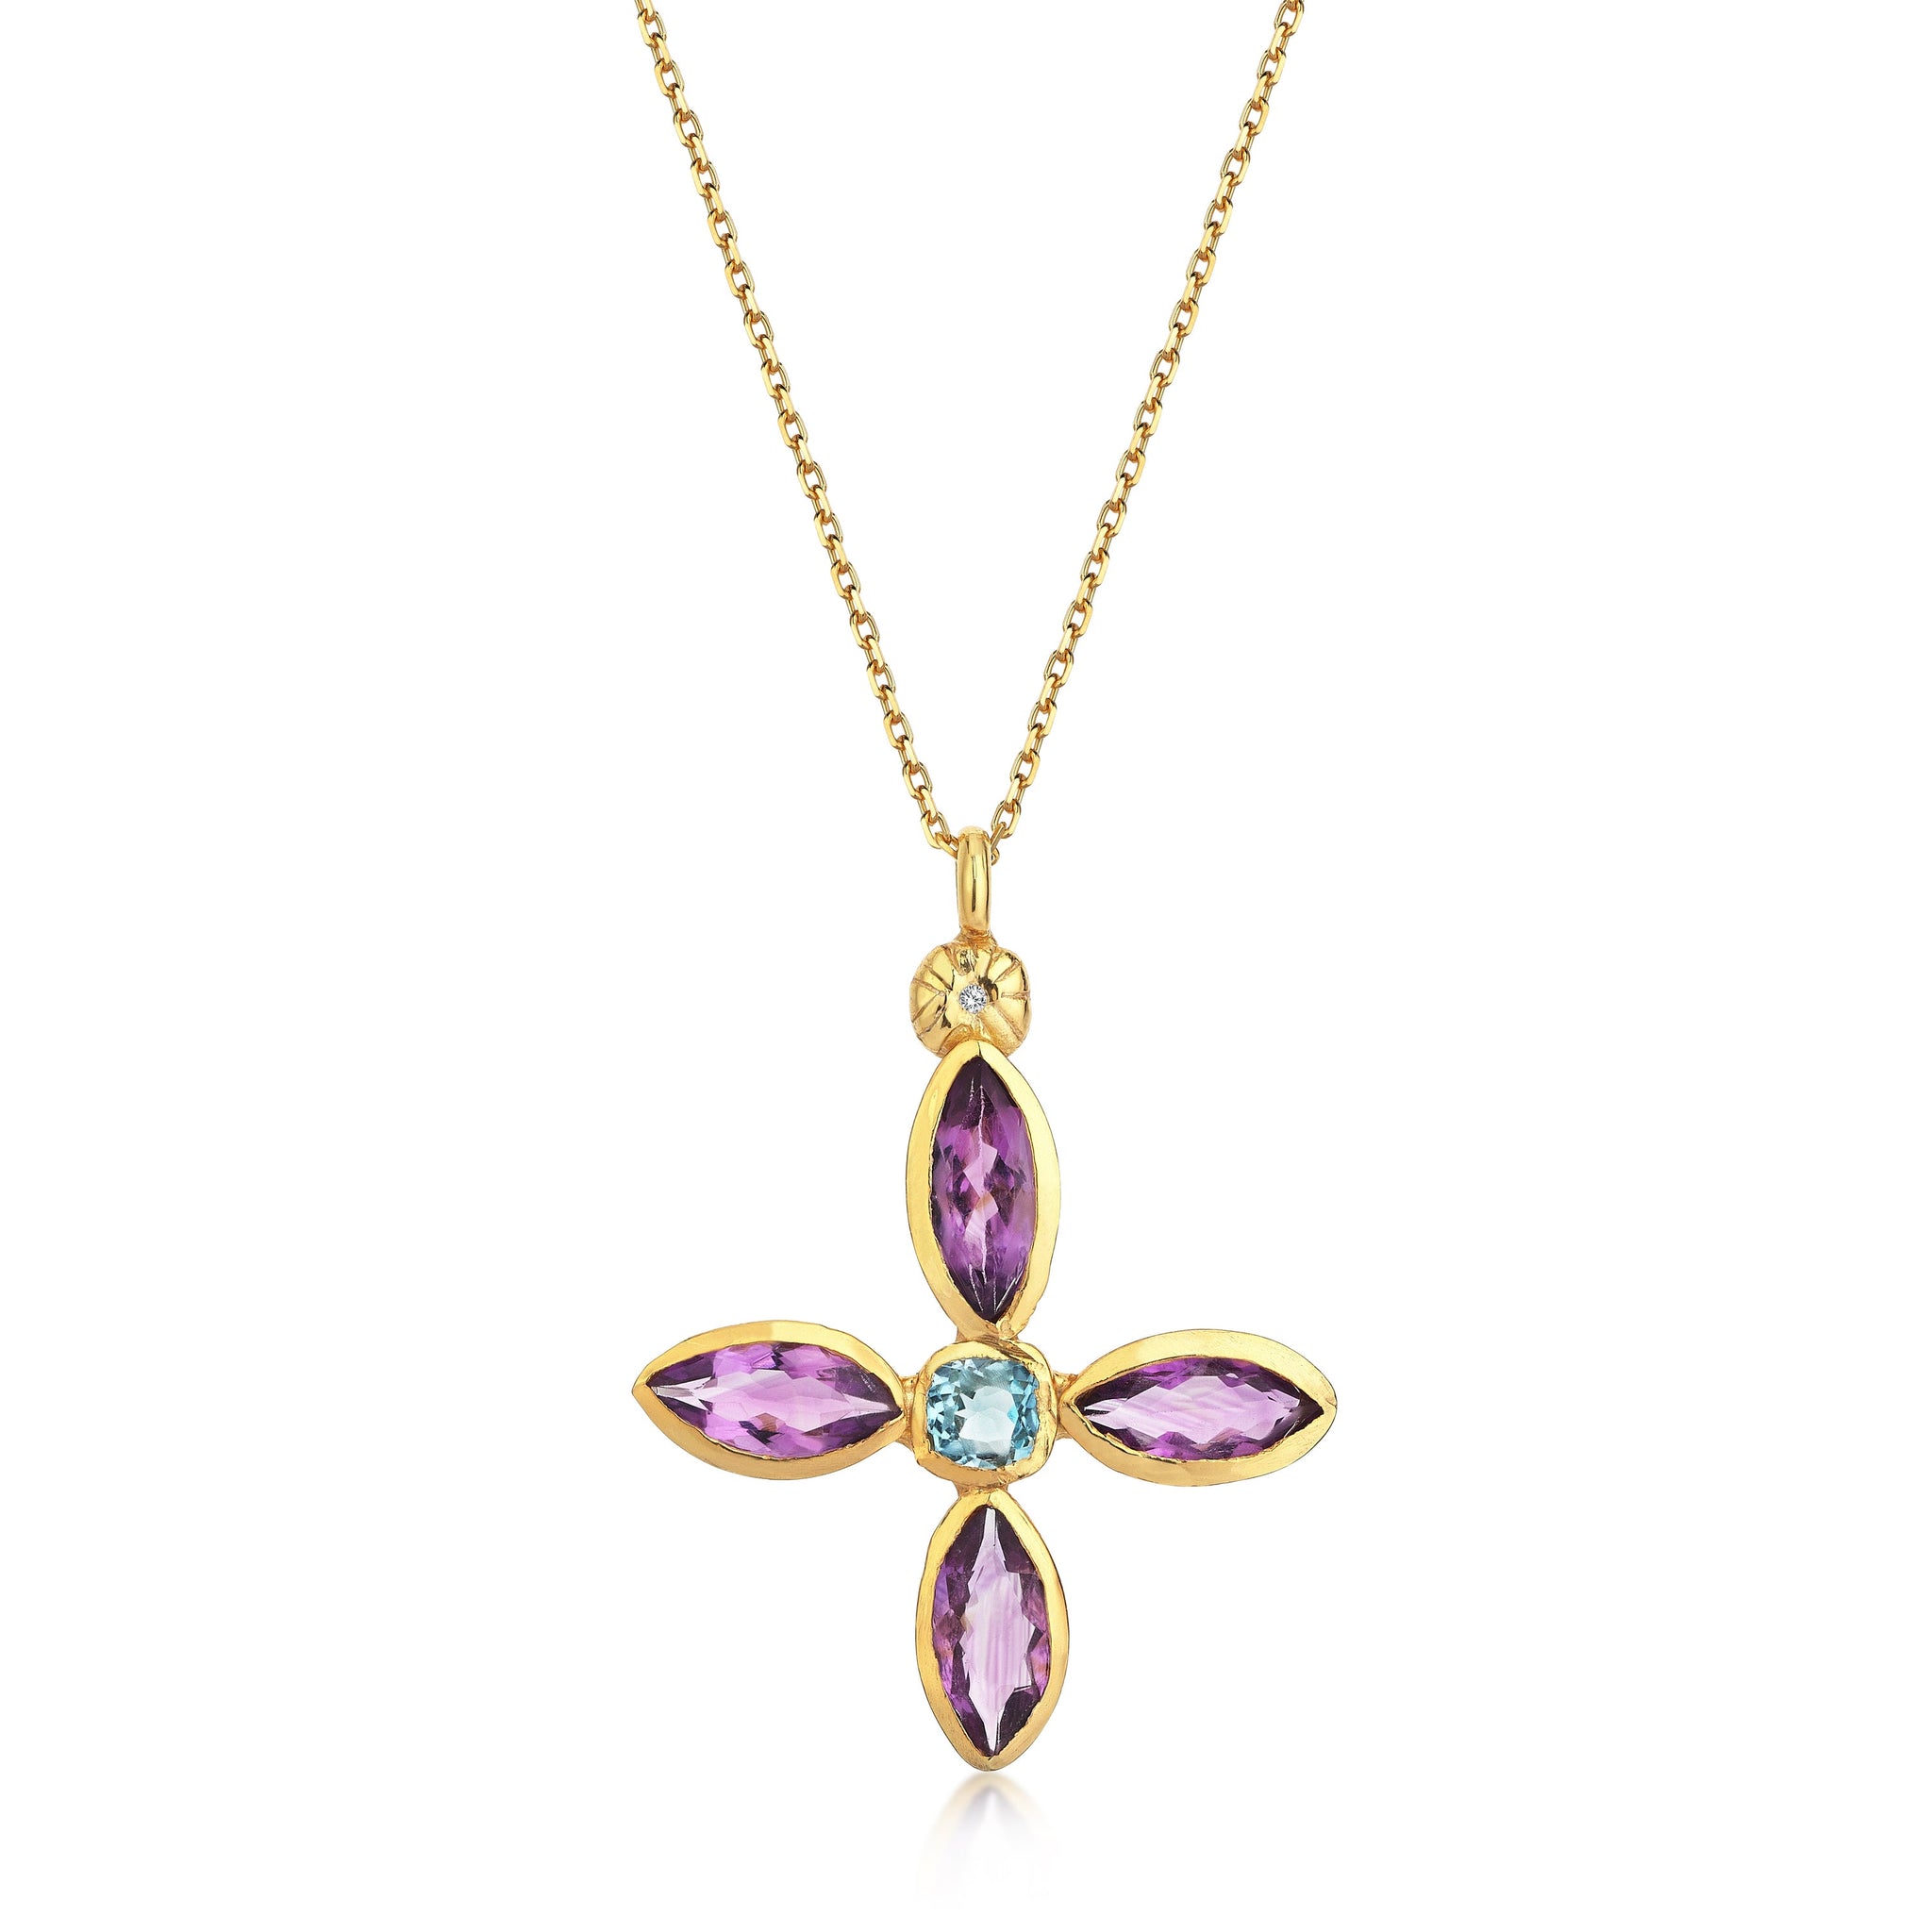 The Lilac Cross Necklace